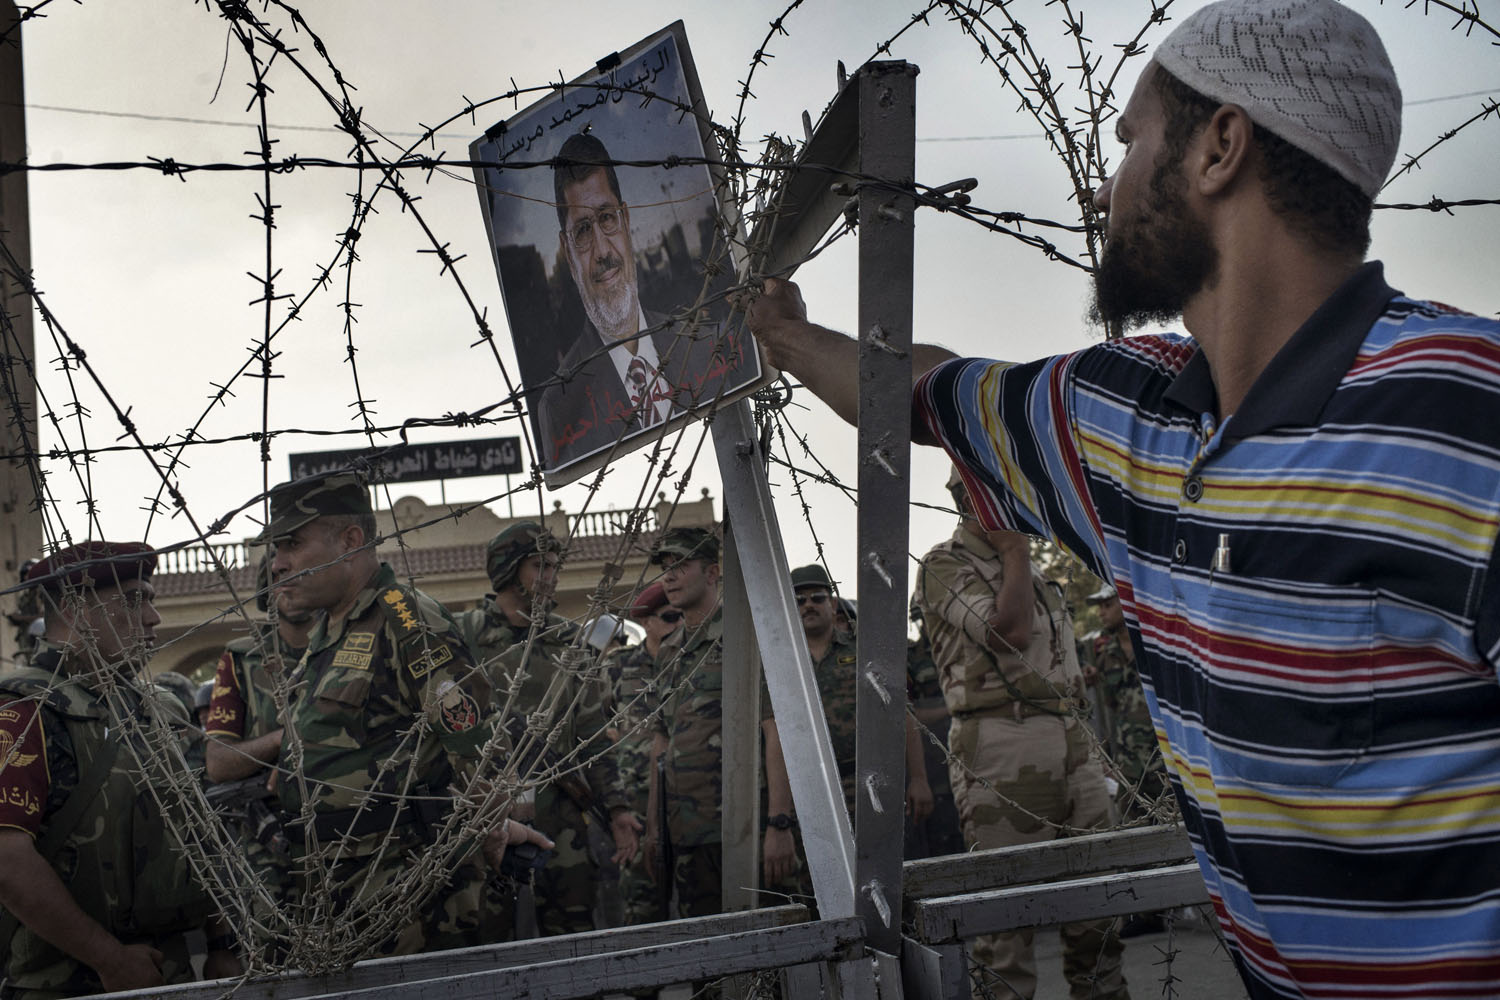 July 5, 2013. A Morsi supporter places a poster of the ousted Egyptian president on barbed wire outside the Cairo headquarters of the Republican Guard.